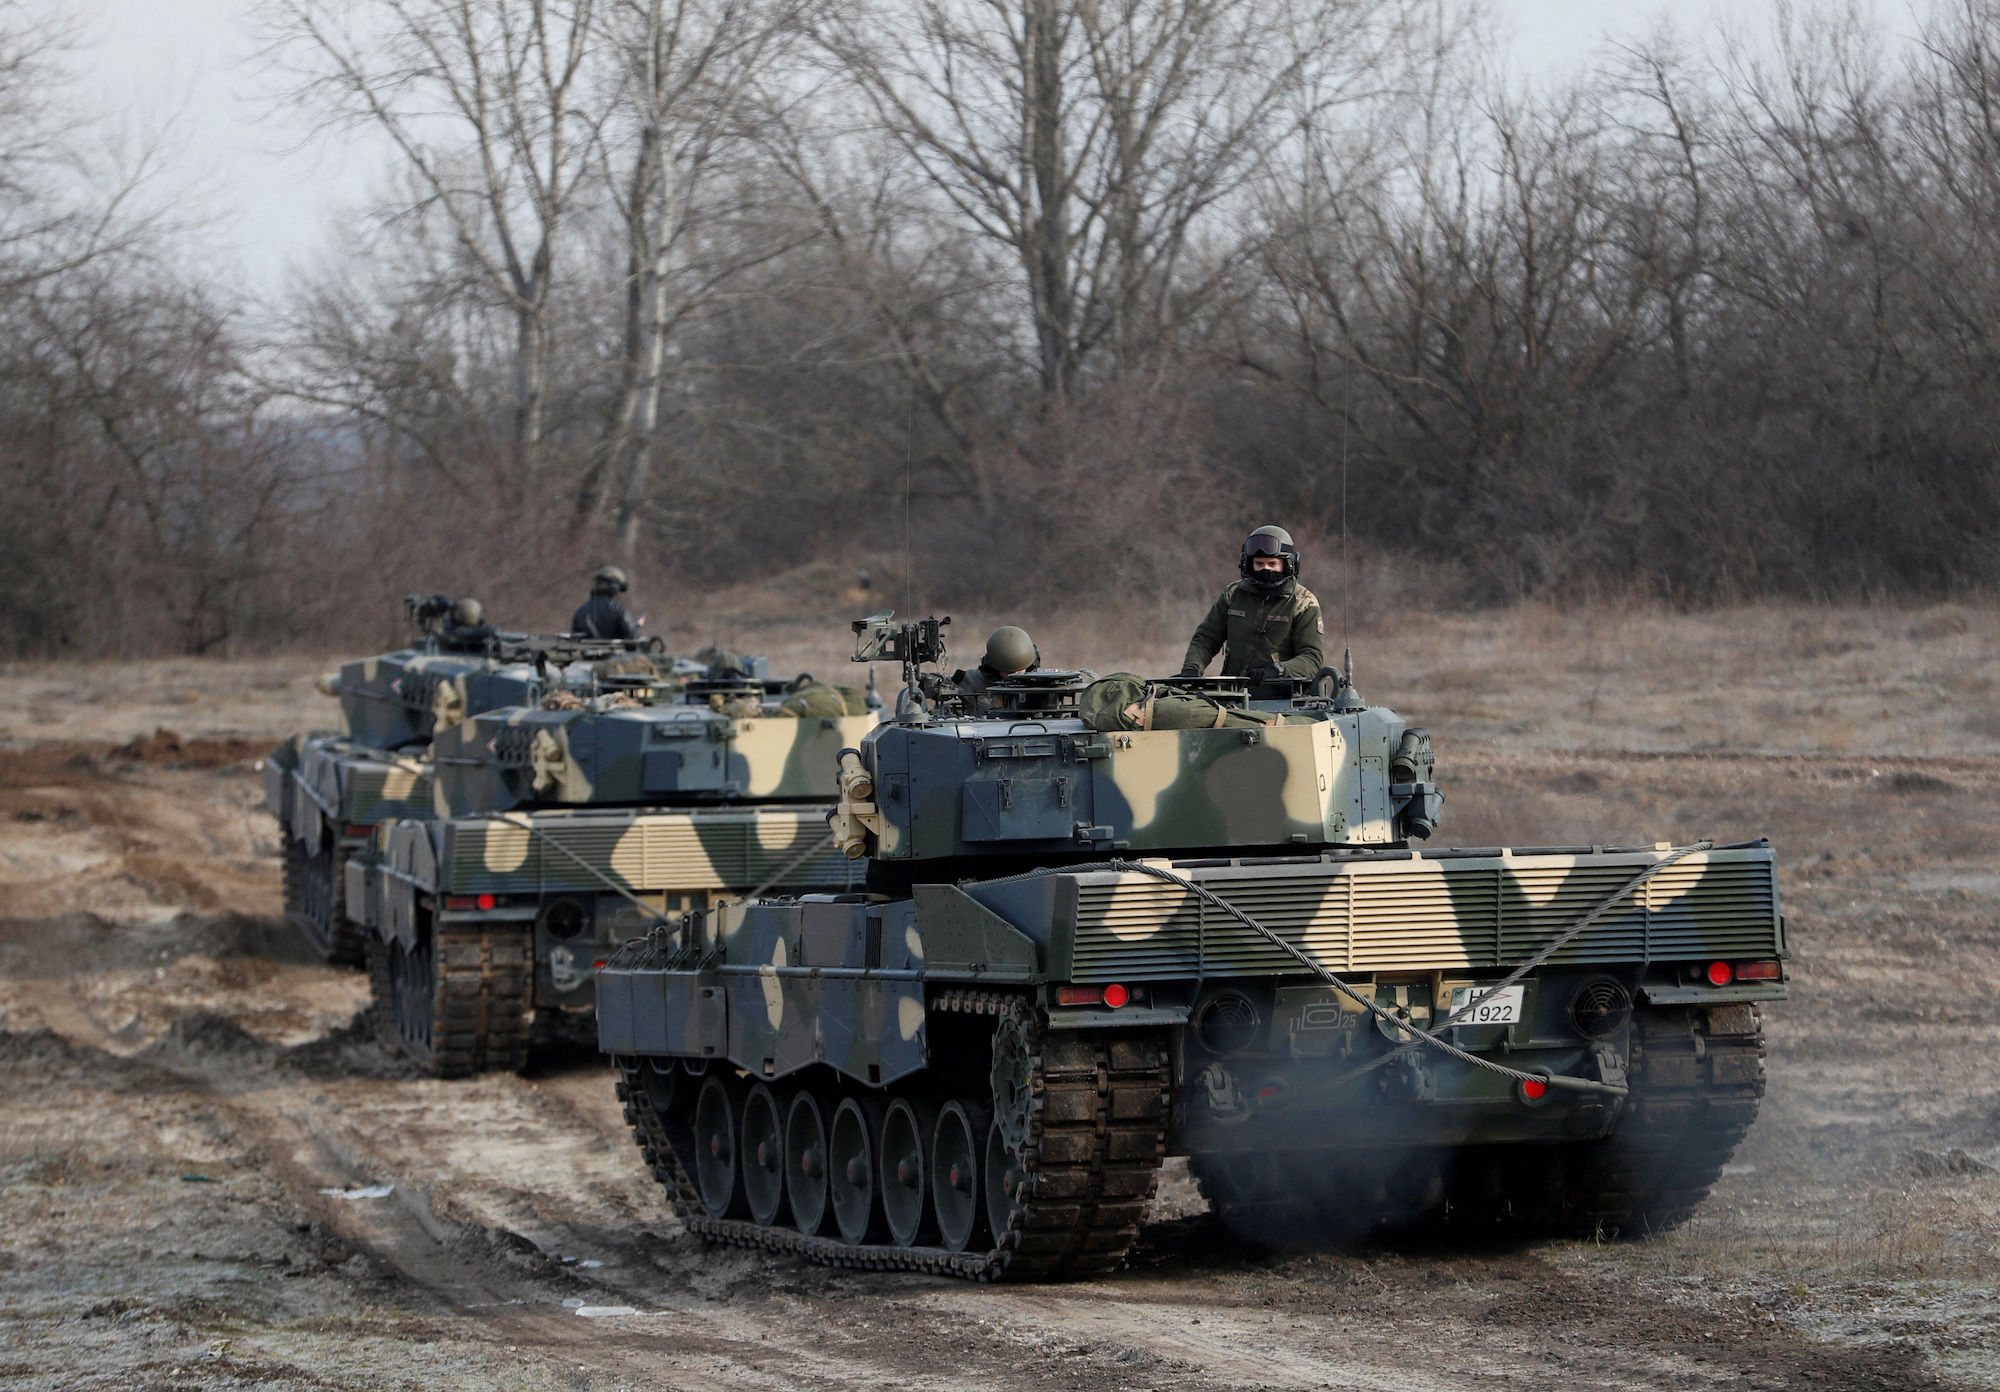 Leopard 2A4 tanks take part in training near Tata, Hungary on Monday.